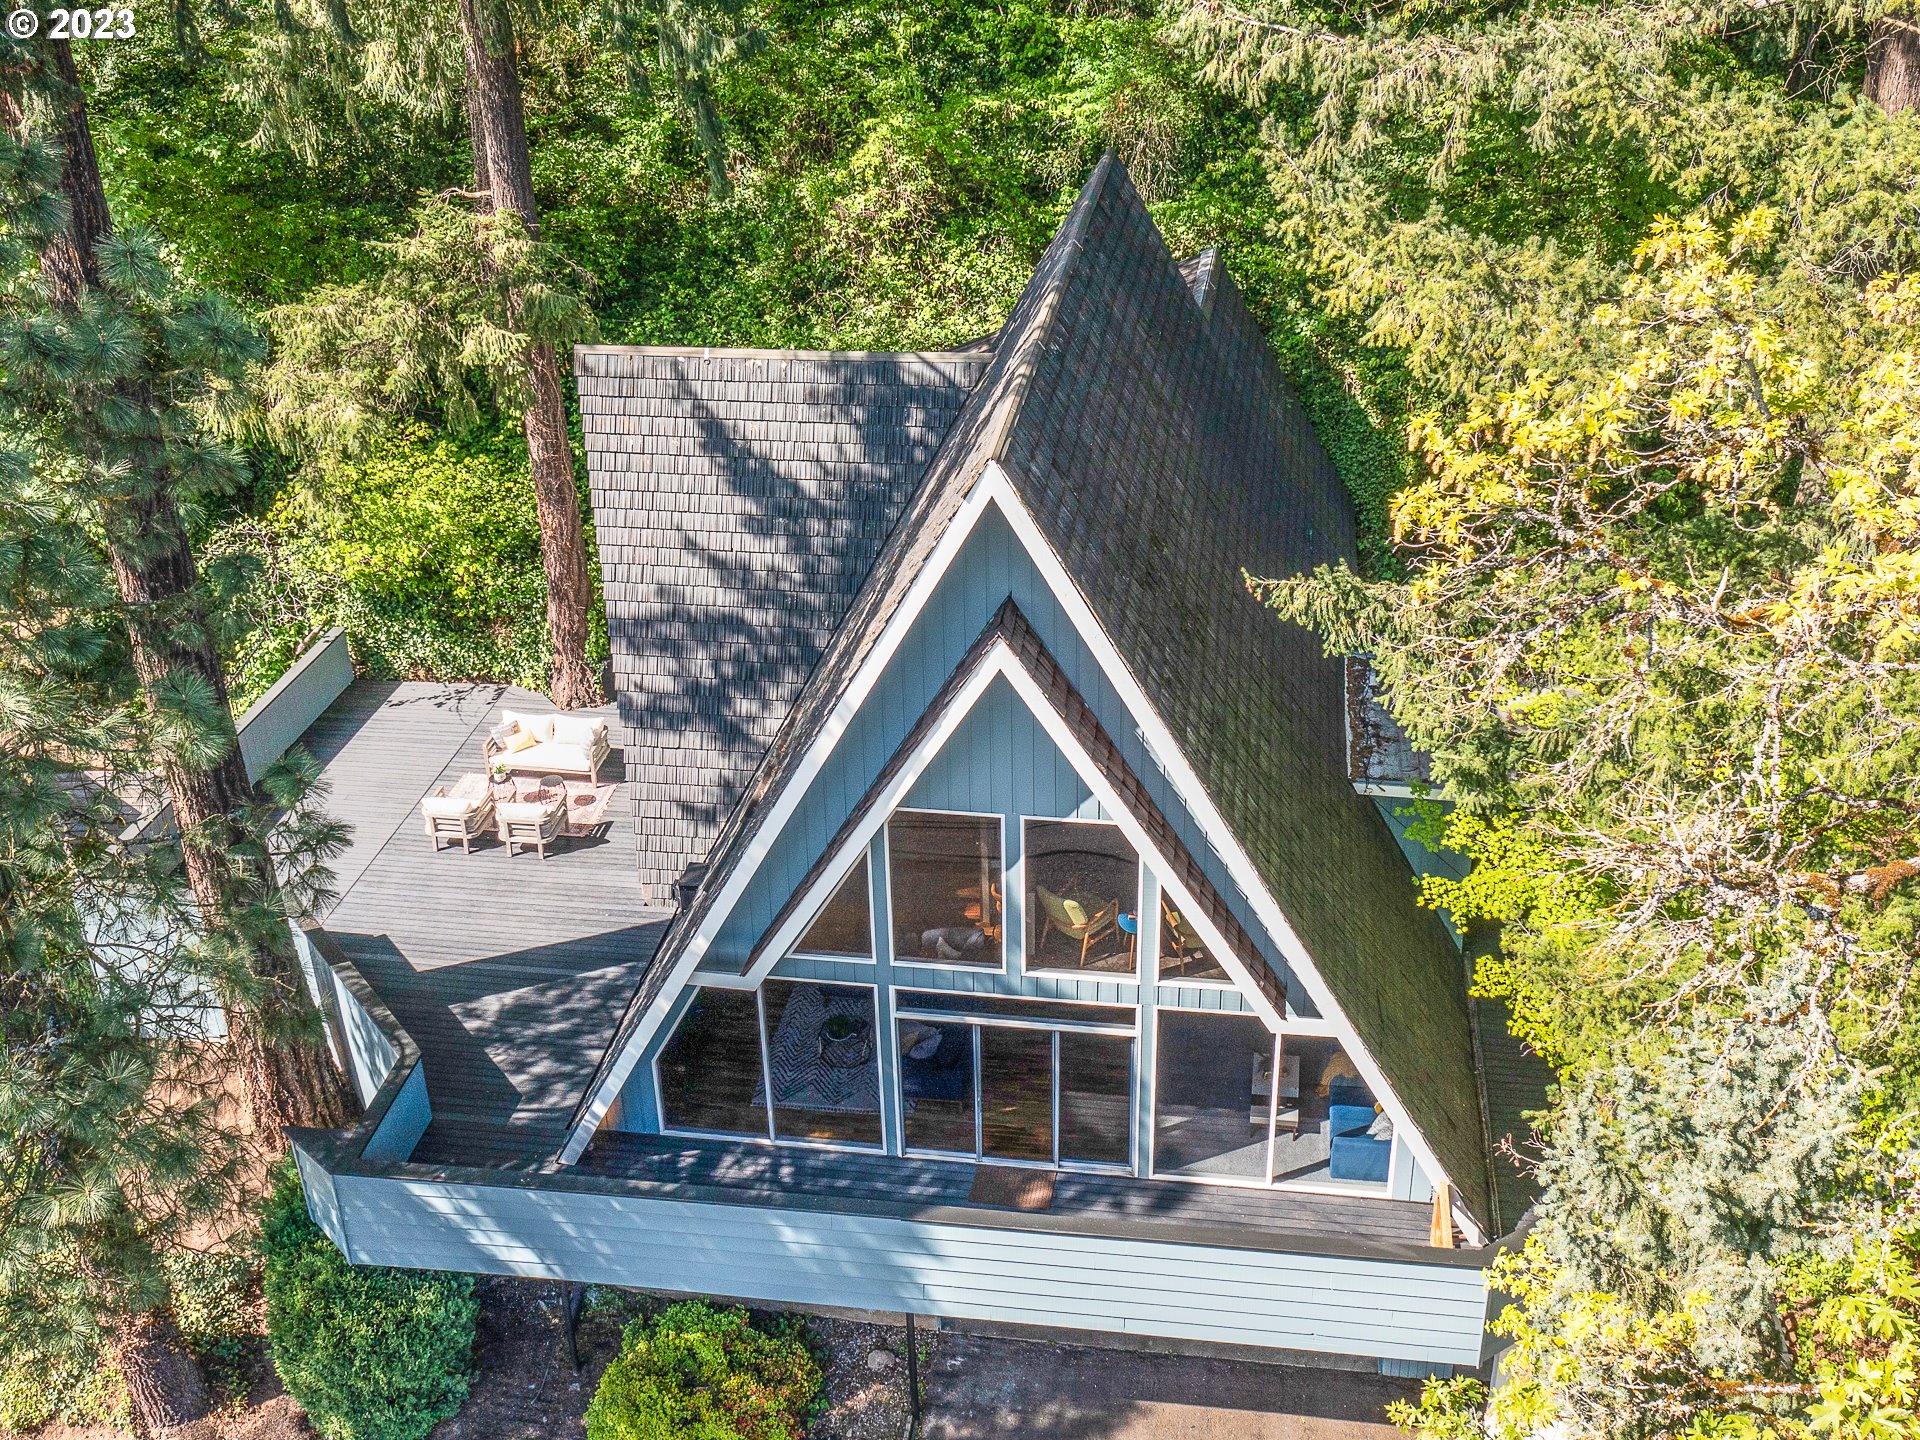 Architecturally stunning A-Frame that tickles the trees of Rocky Butte amplifying authenticity. Respectfully remodeled paying homage to the chalet. Upstanding updates w/period like finishes. Spectacular southern views w/peaks of Downton Portland from the expansive wall of windows and wrap around 1,000+ sqft deck. Beamed Ceilings, stunning skylights, walls of windows, wonderful wood paneling, handsome hardwoods. Sexy staircase and lovely loft. The layout allows for 2 separate living spaces w/3 bed/2 bath upstairs & 1 bed/1 bath w/ full kitchen in downstairs daylight basement. ADU received rents upwards of $2,300 this past year. Main home has rented for $4000-$4400/month. Built by local Architect William Wayman for himself.